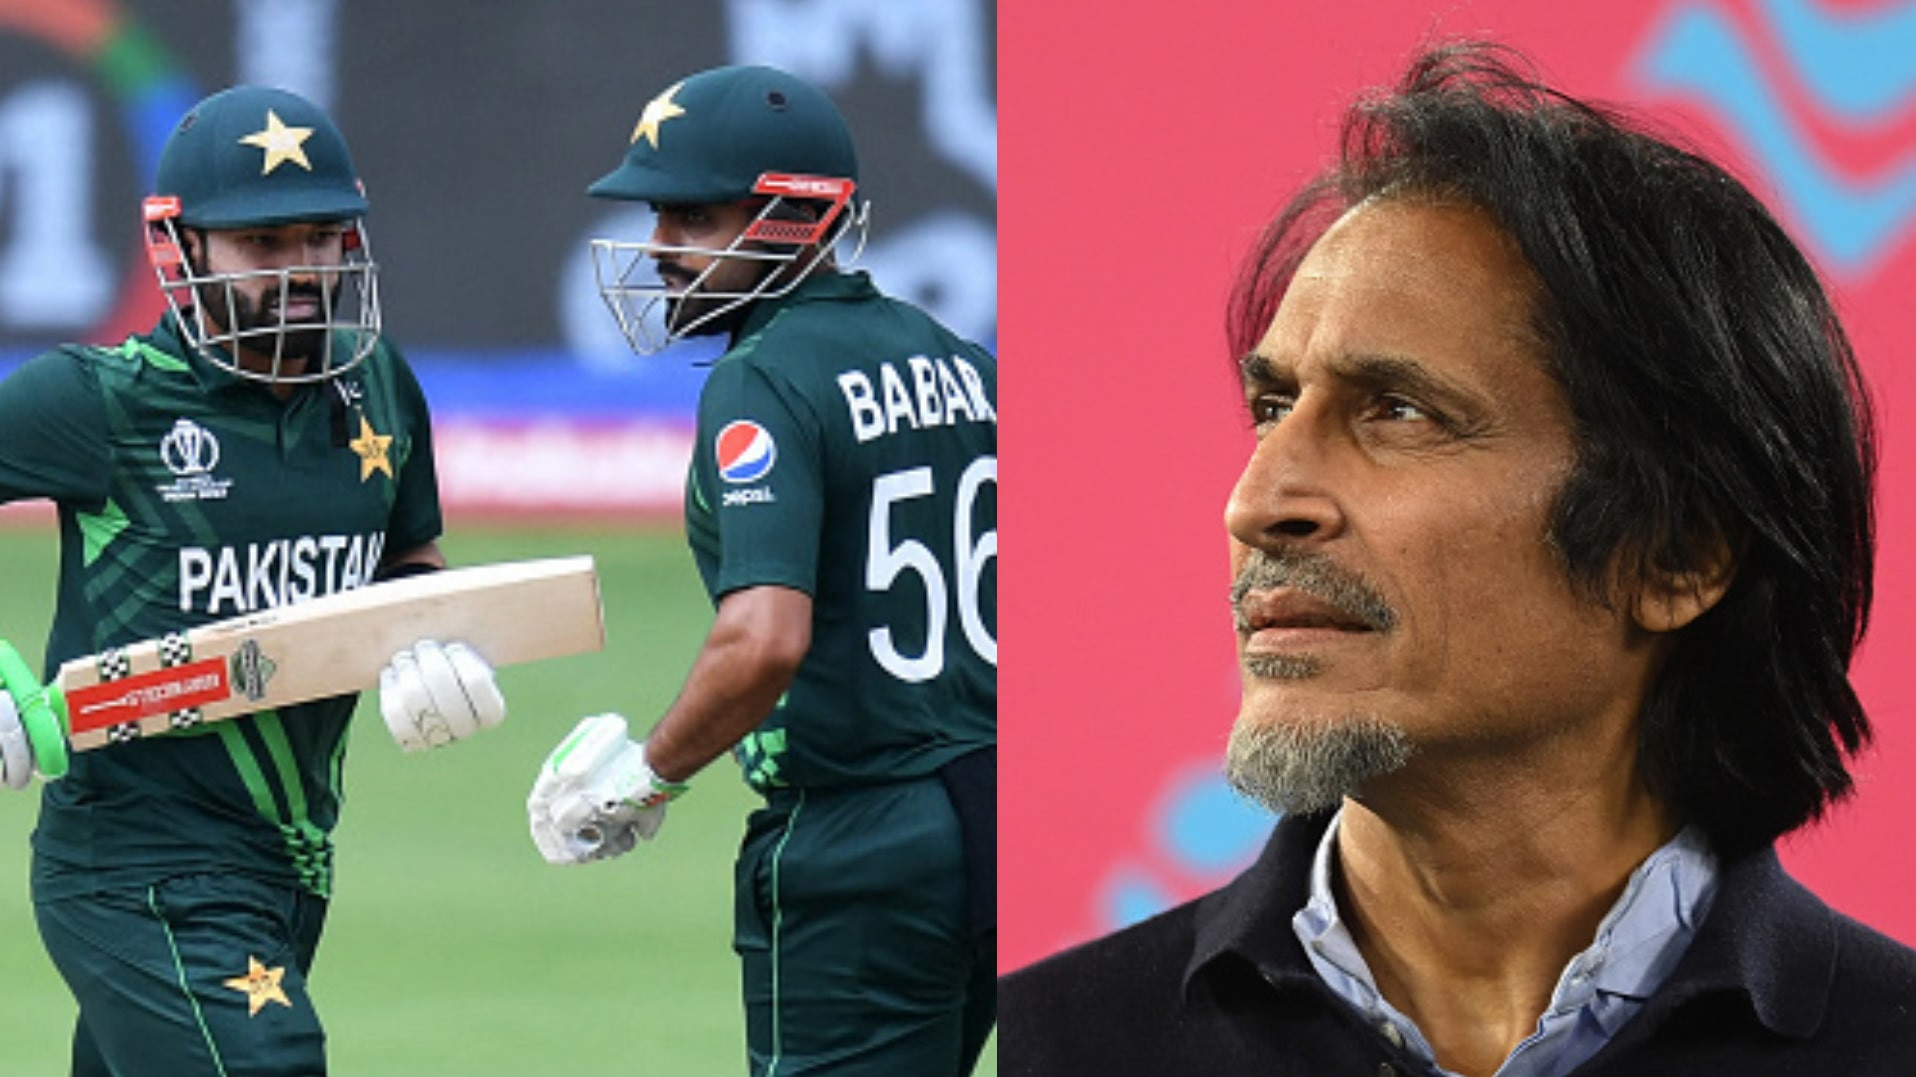 CWC 2023: ‘Pakistan will have to score 400 on these pitches’- Ramiz Raja after loss to New Zealand in warm-up game